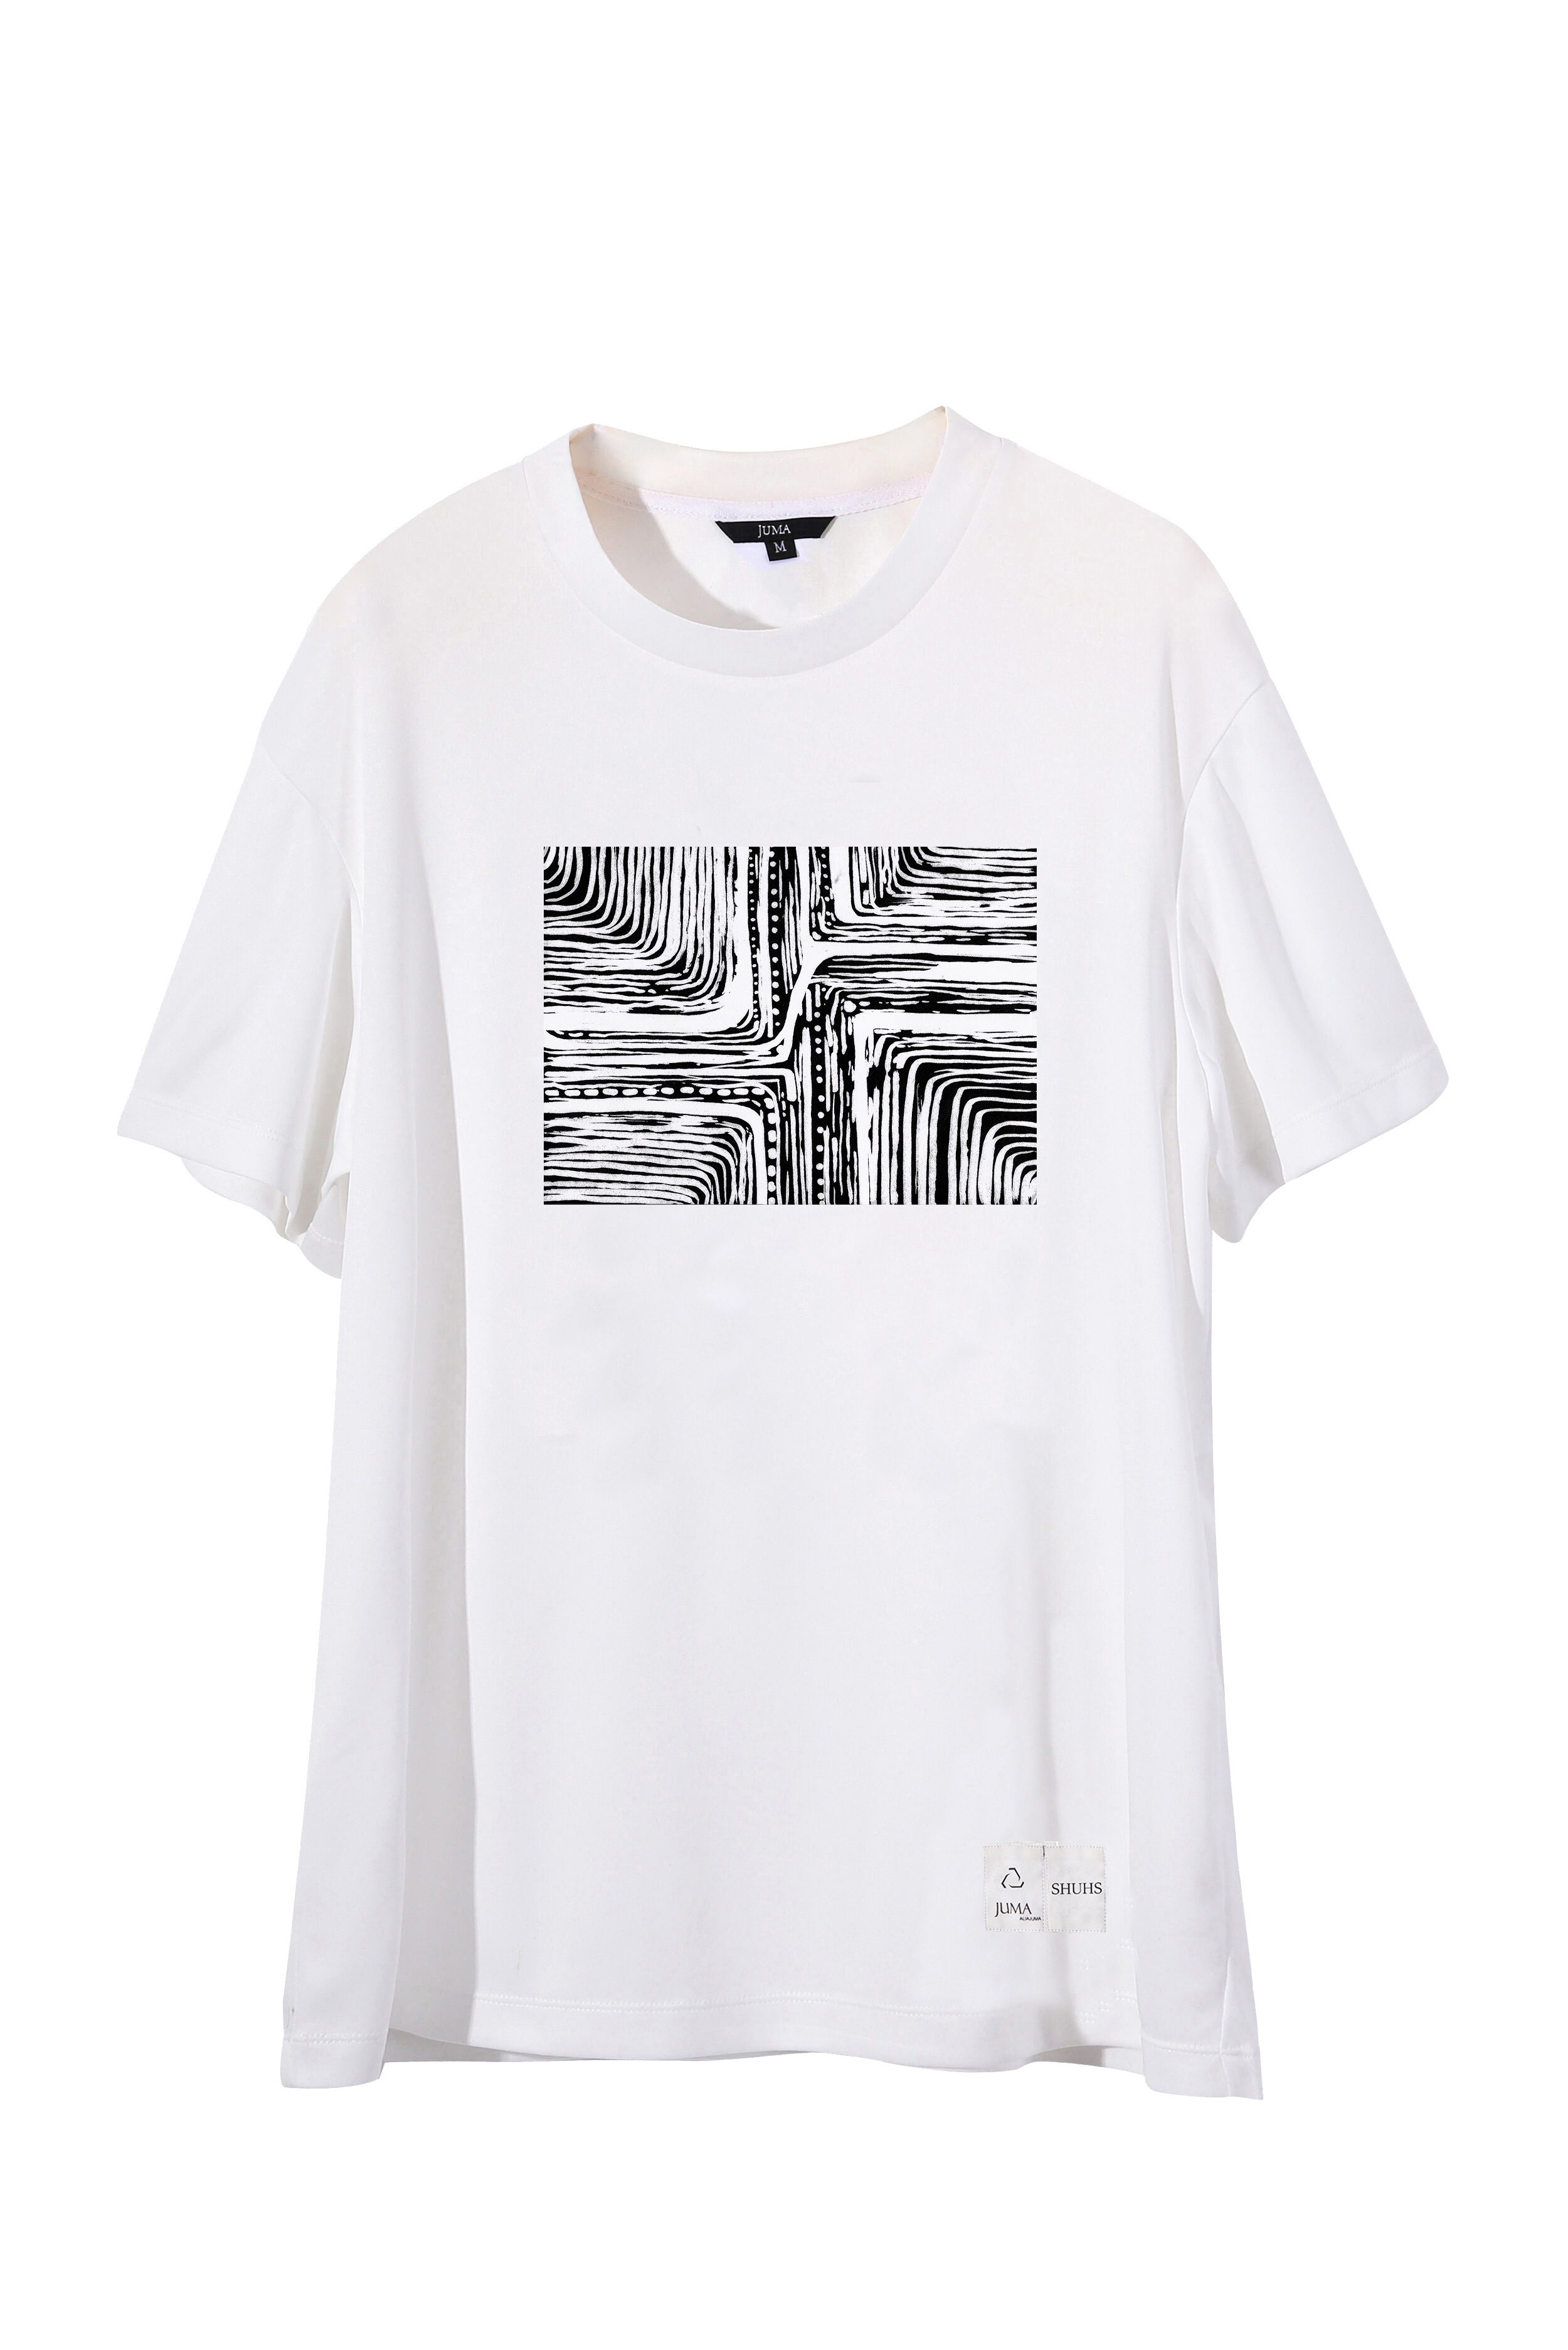 Recharge 印花 3 件 T 恤 - 4 个再生水瓶 - 黑色｜Recharge Print 3 T-Shirt - 4 Recycled Water Bottles-Black